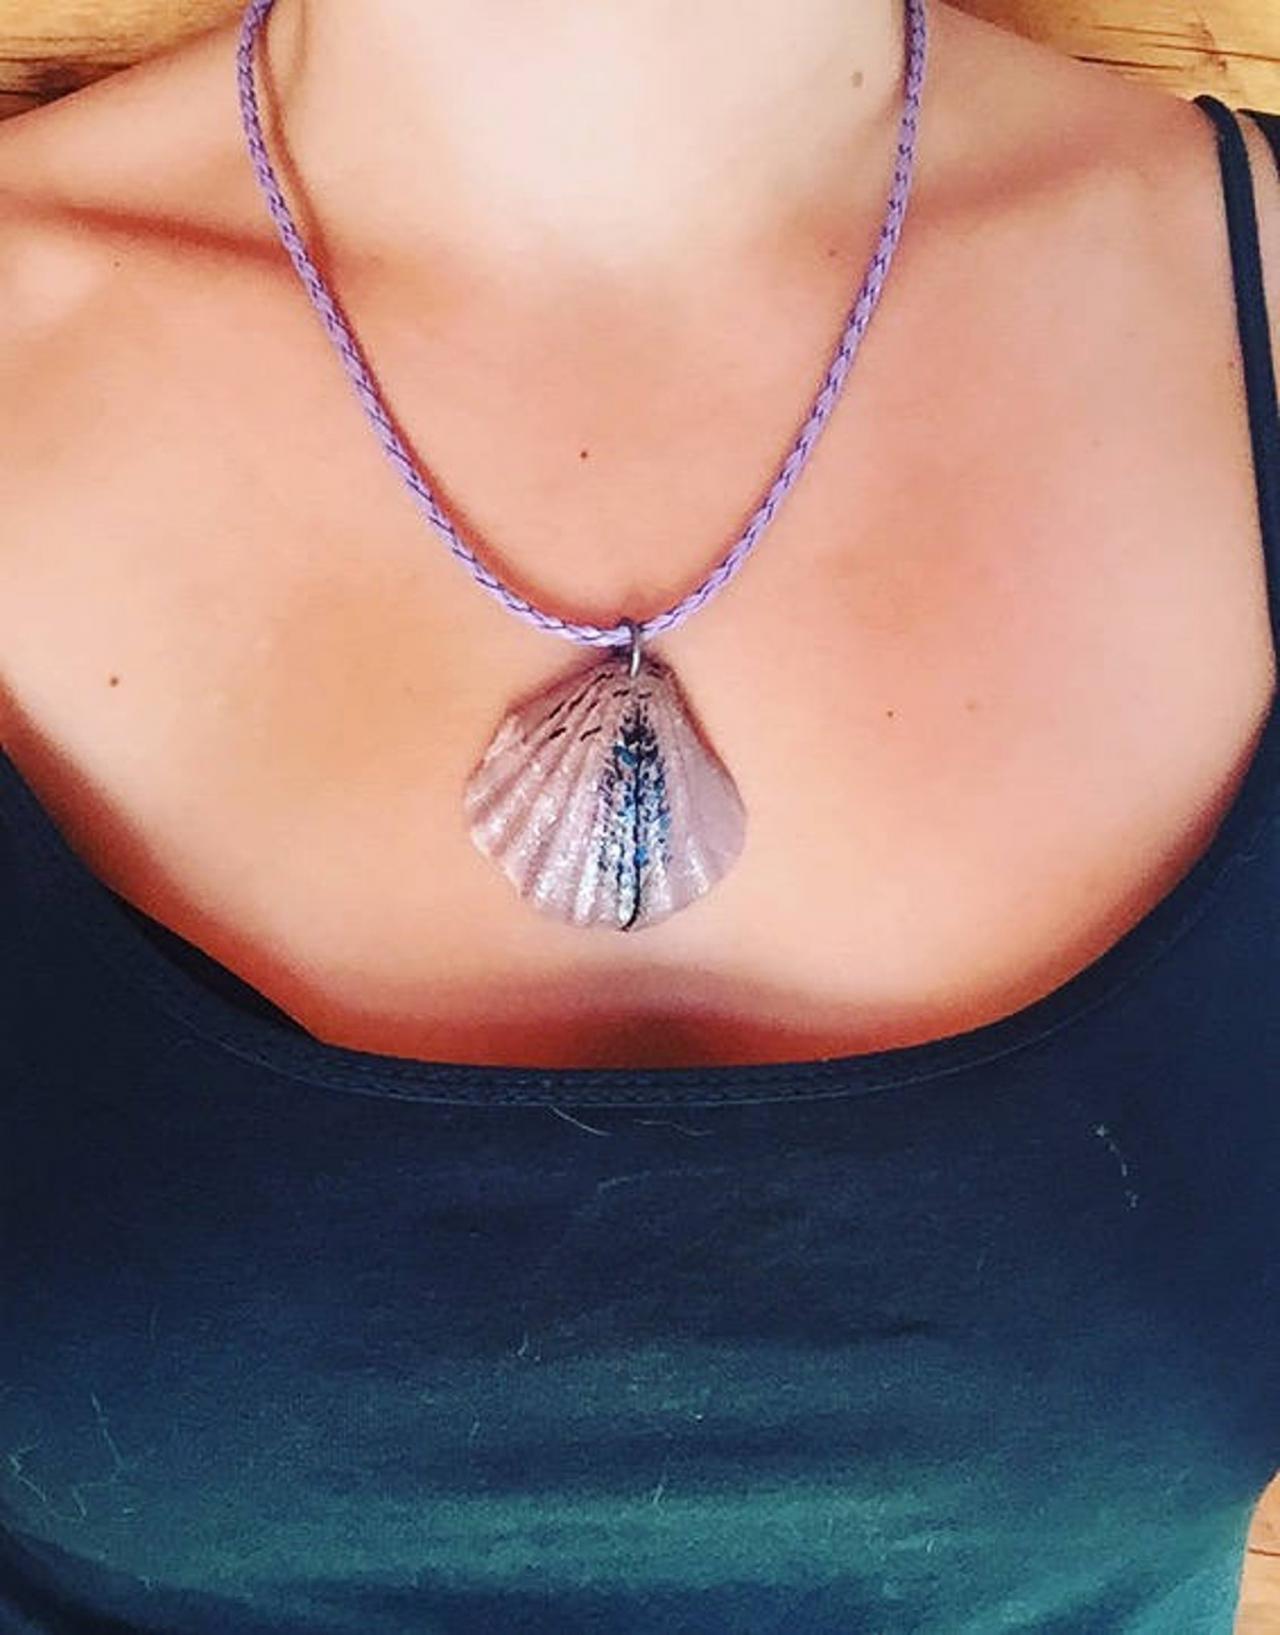 Boho Feather Shell Necklace Necklace Surfer Beach Sea Shell Jewelry